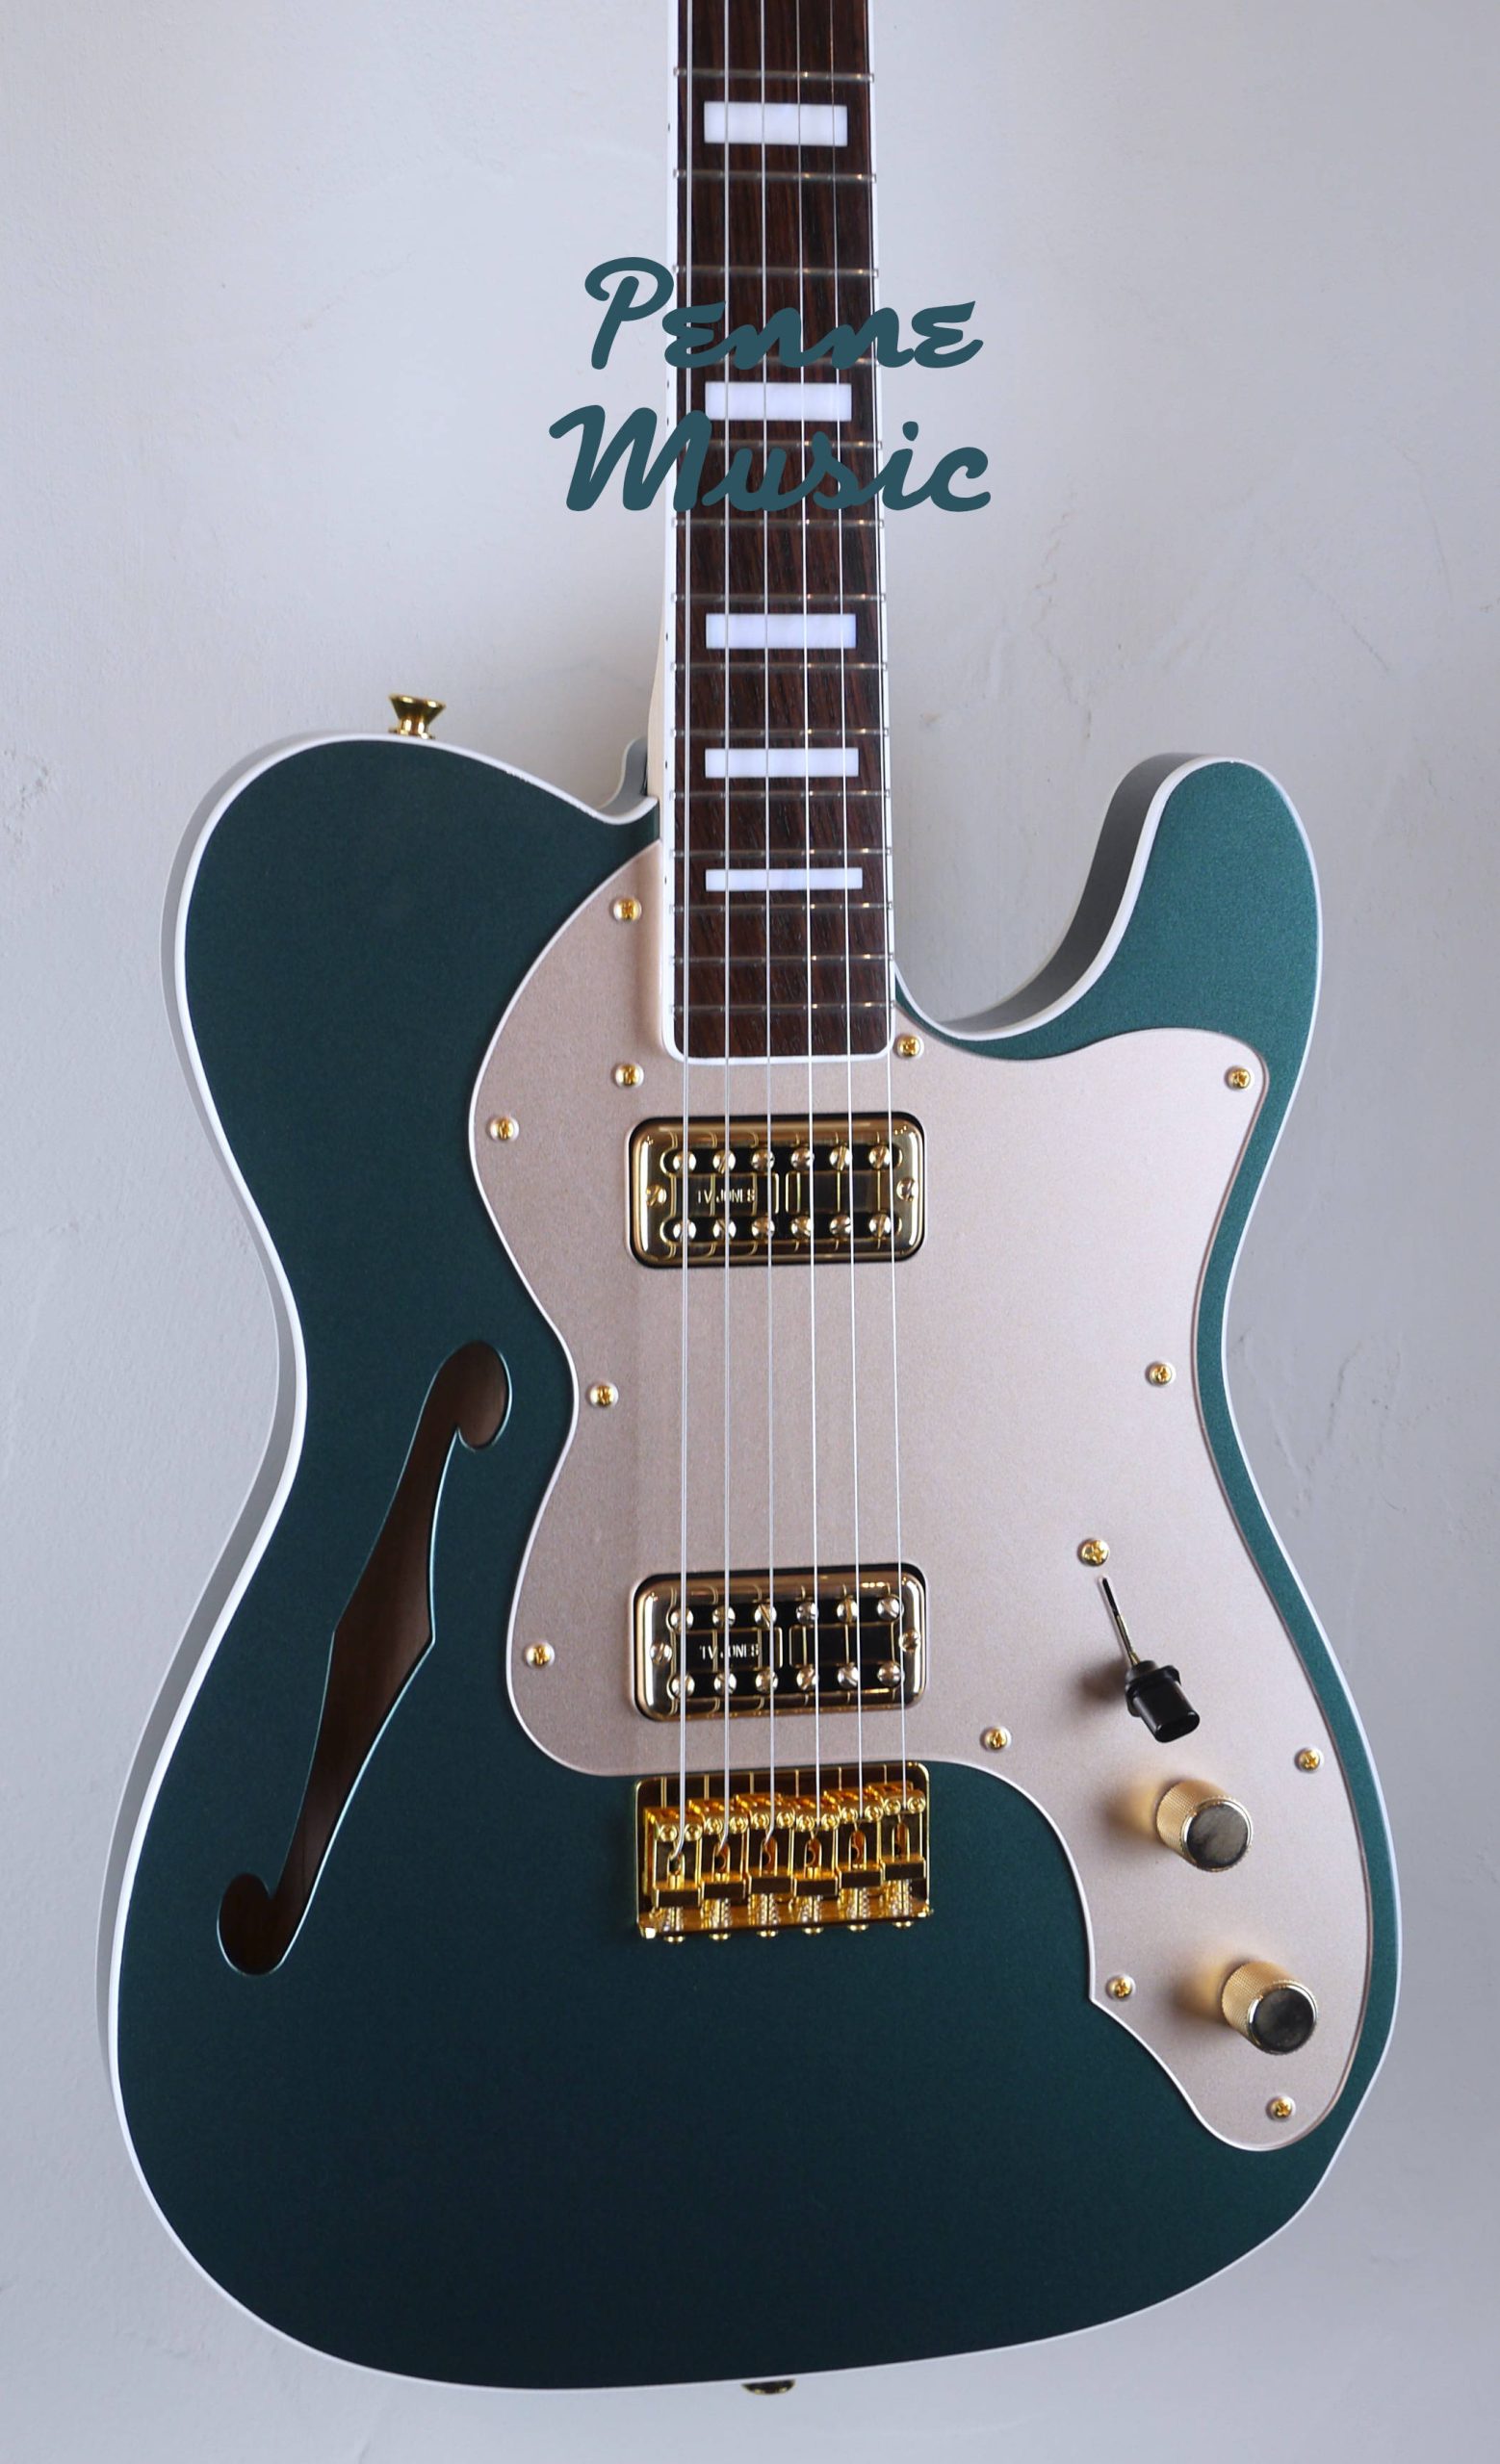 Fender Limited Edition Super Deluxe Thinline Telecaster Sherwood Green Metallic 3